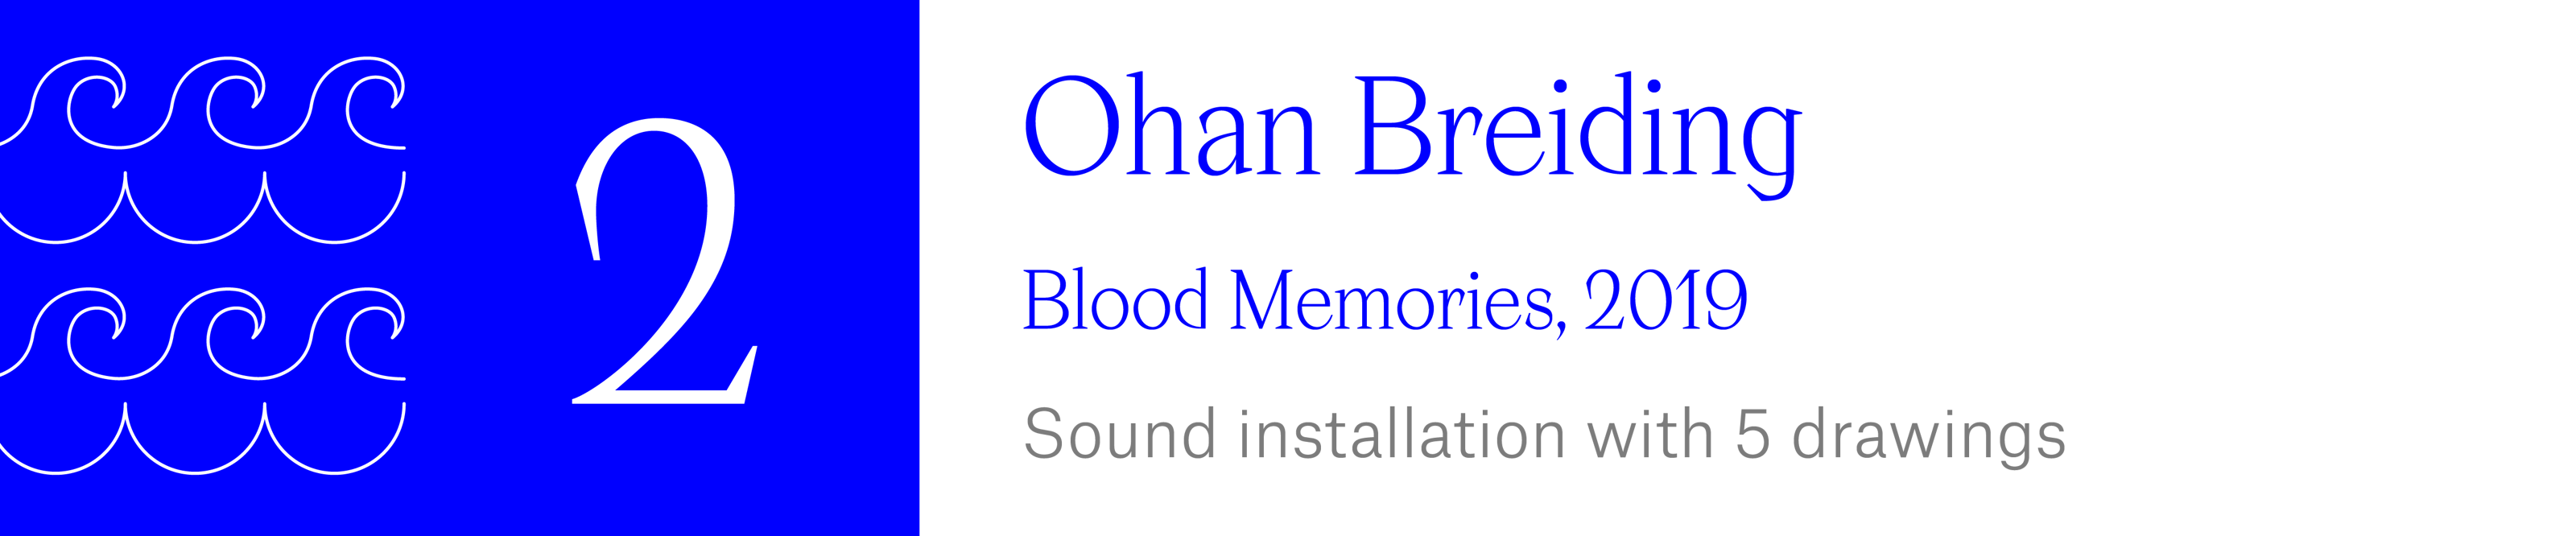 The Wave (2) - Ohan Breiding. Blood Memories, 2019, Sound installation with 5 drawings